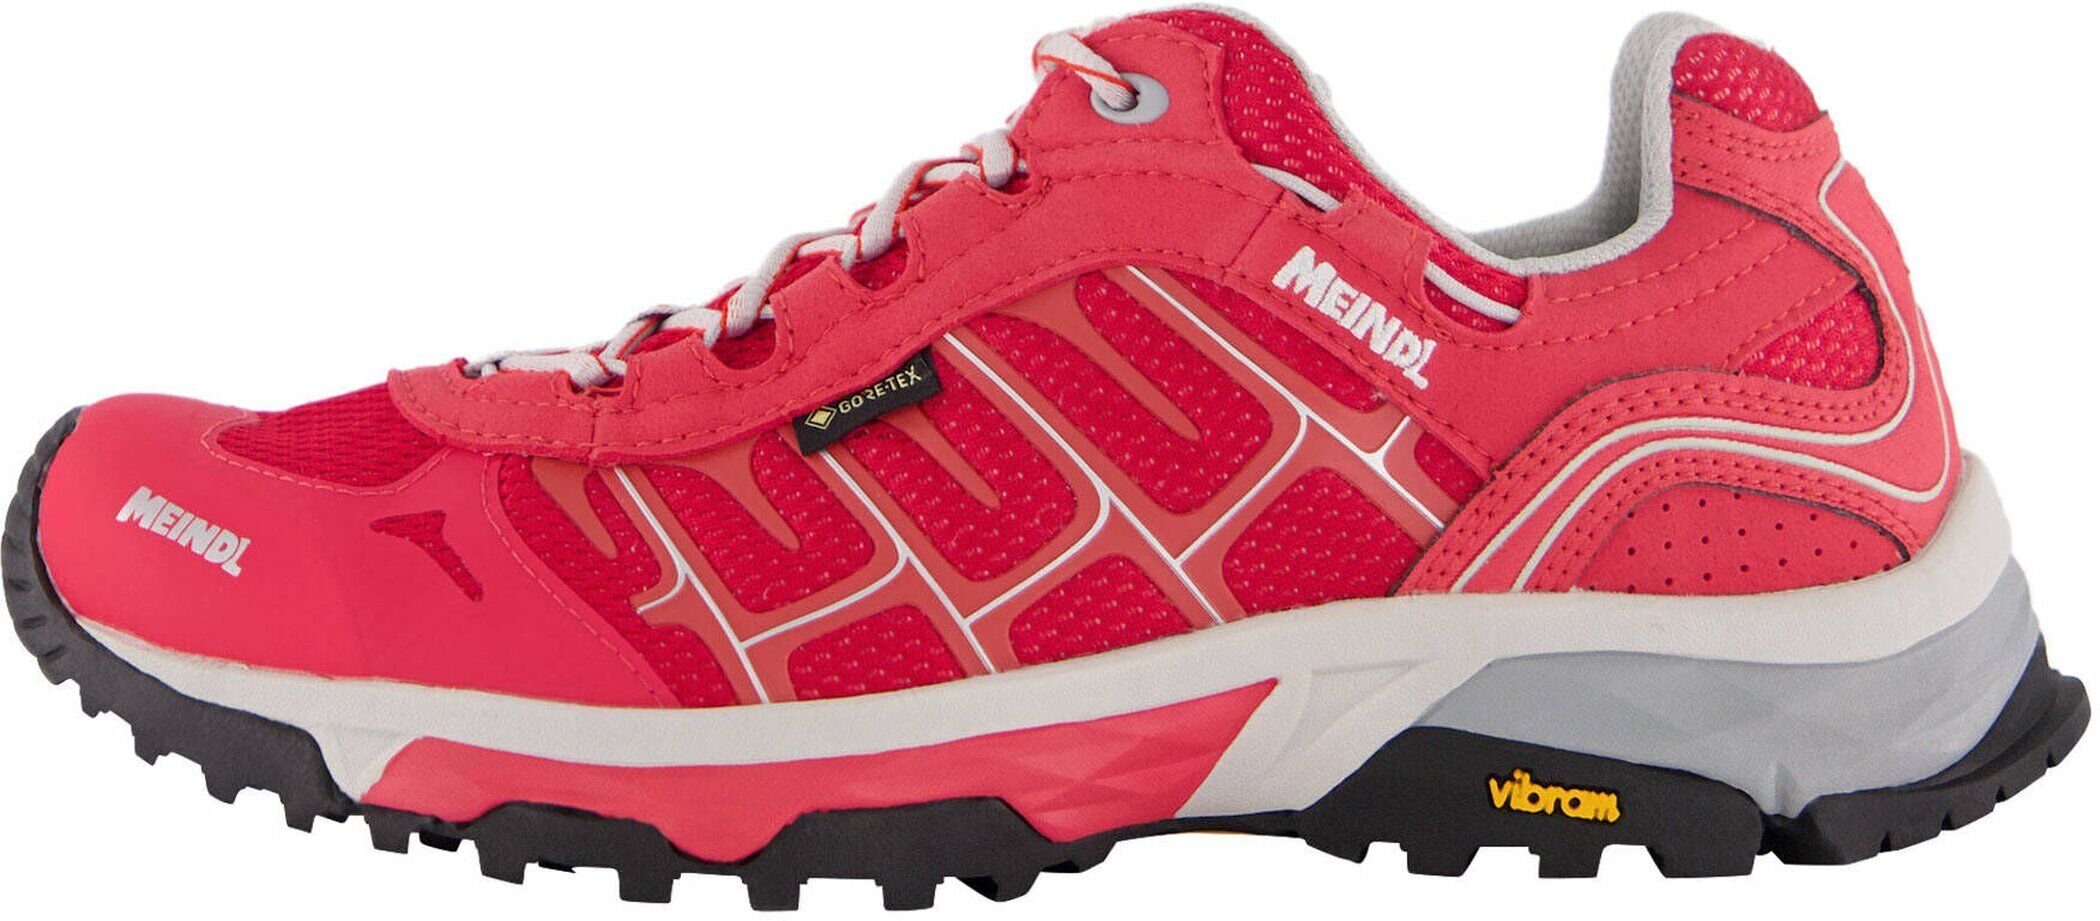 Meindl Finale Lady GTX Outdoorschuh (1-tlg) rot/silber